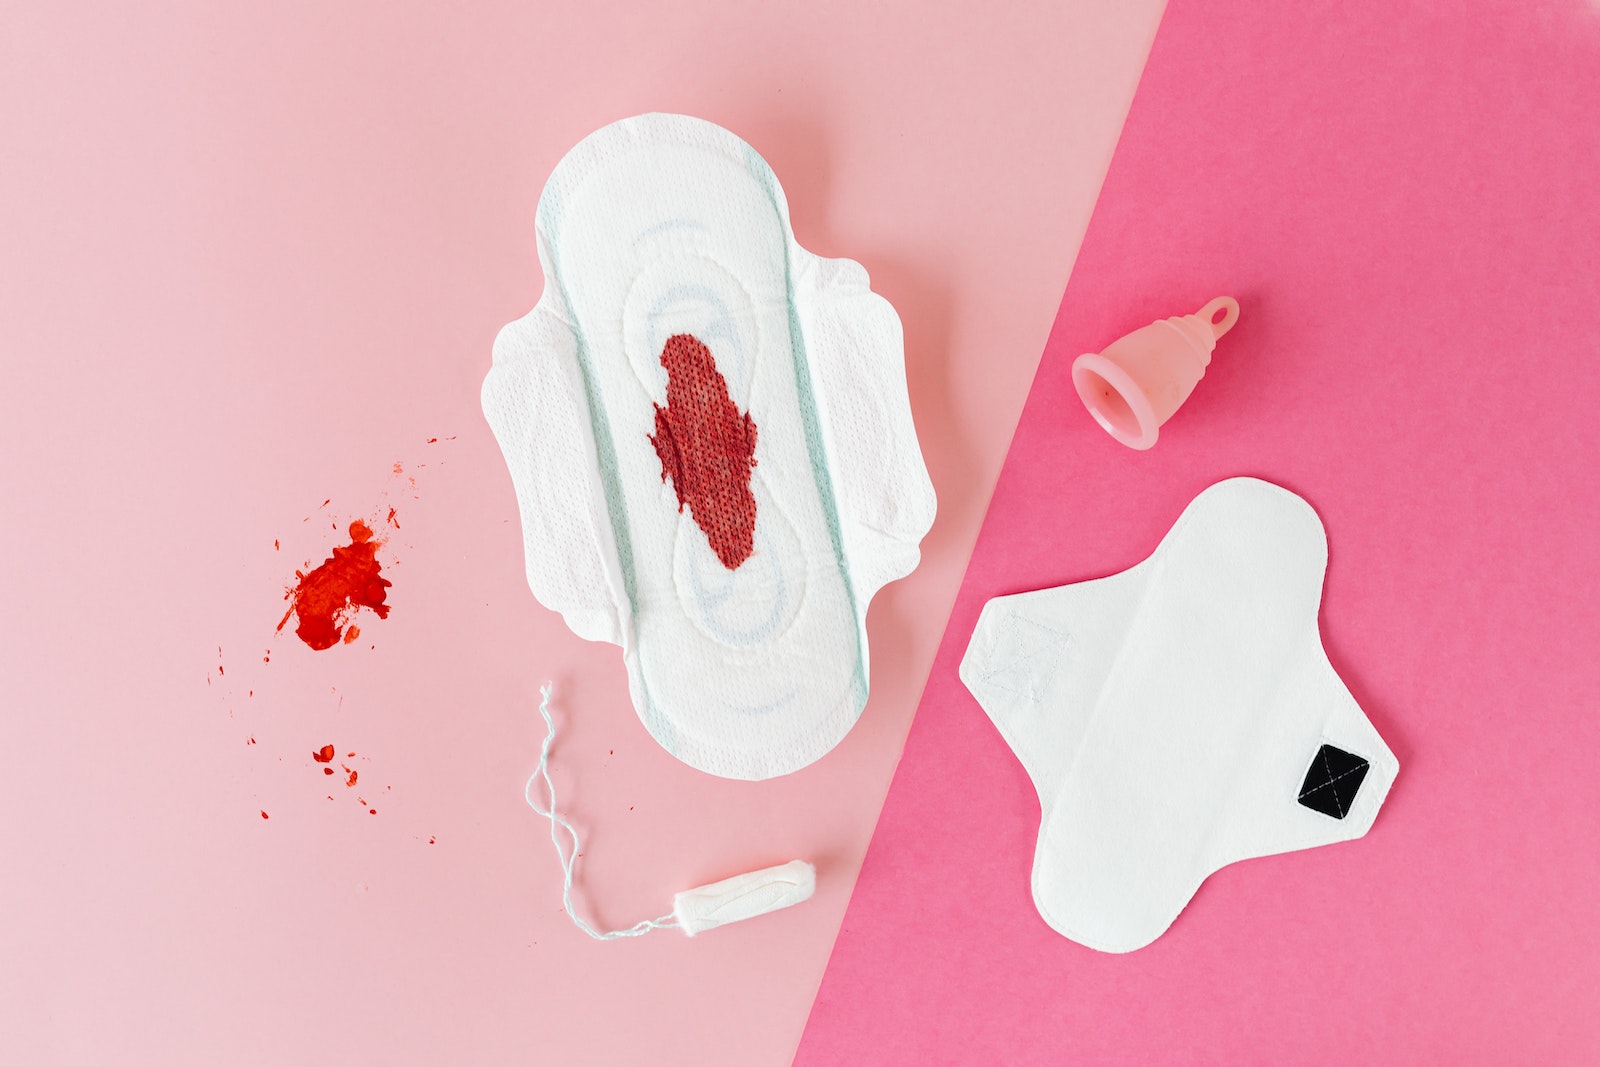 A Pad with Menstruation